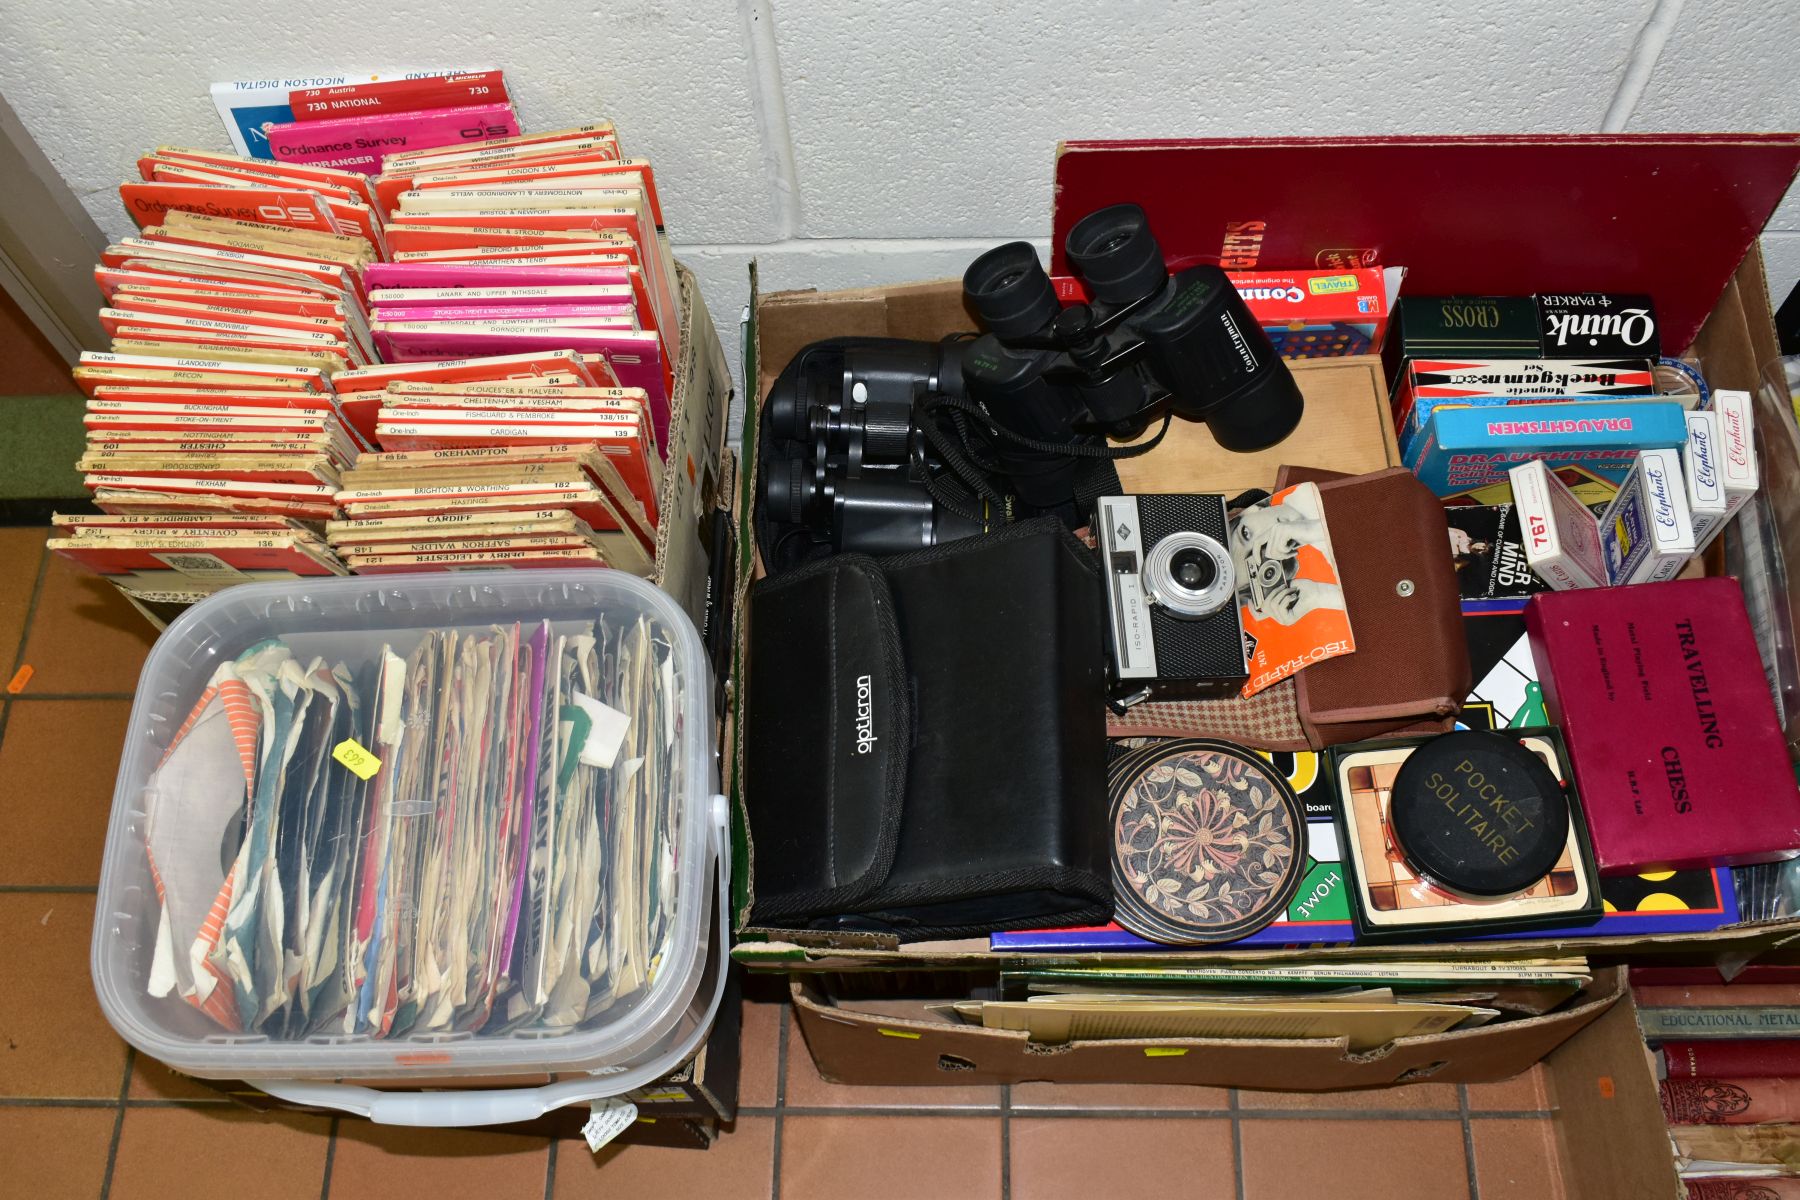 SIX BOXES OF LP'S, SINGLES RECORDS, CDS, DVDS, ONE INCH FOLDED MAPS, GAMES, BINOCULARS, etc, the